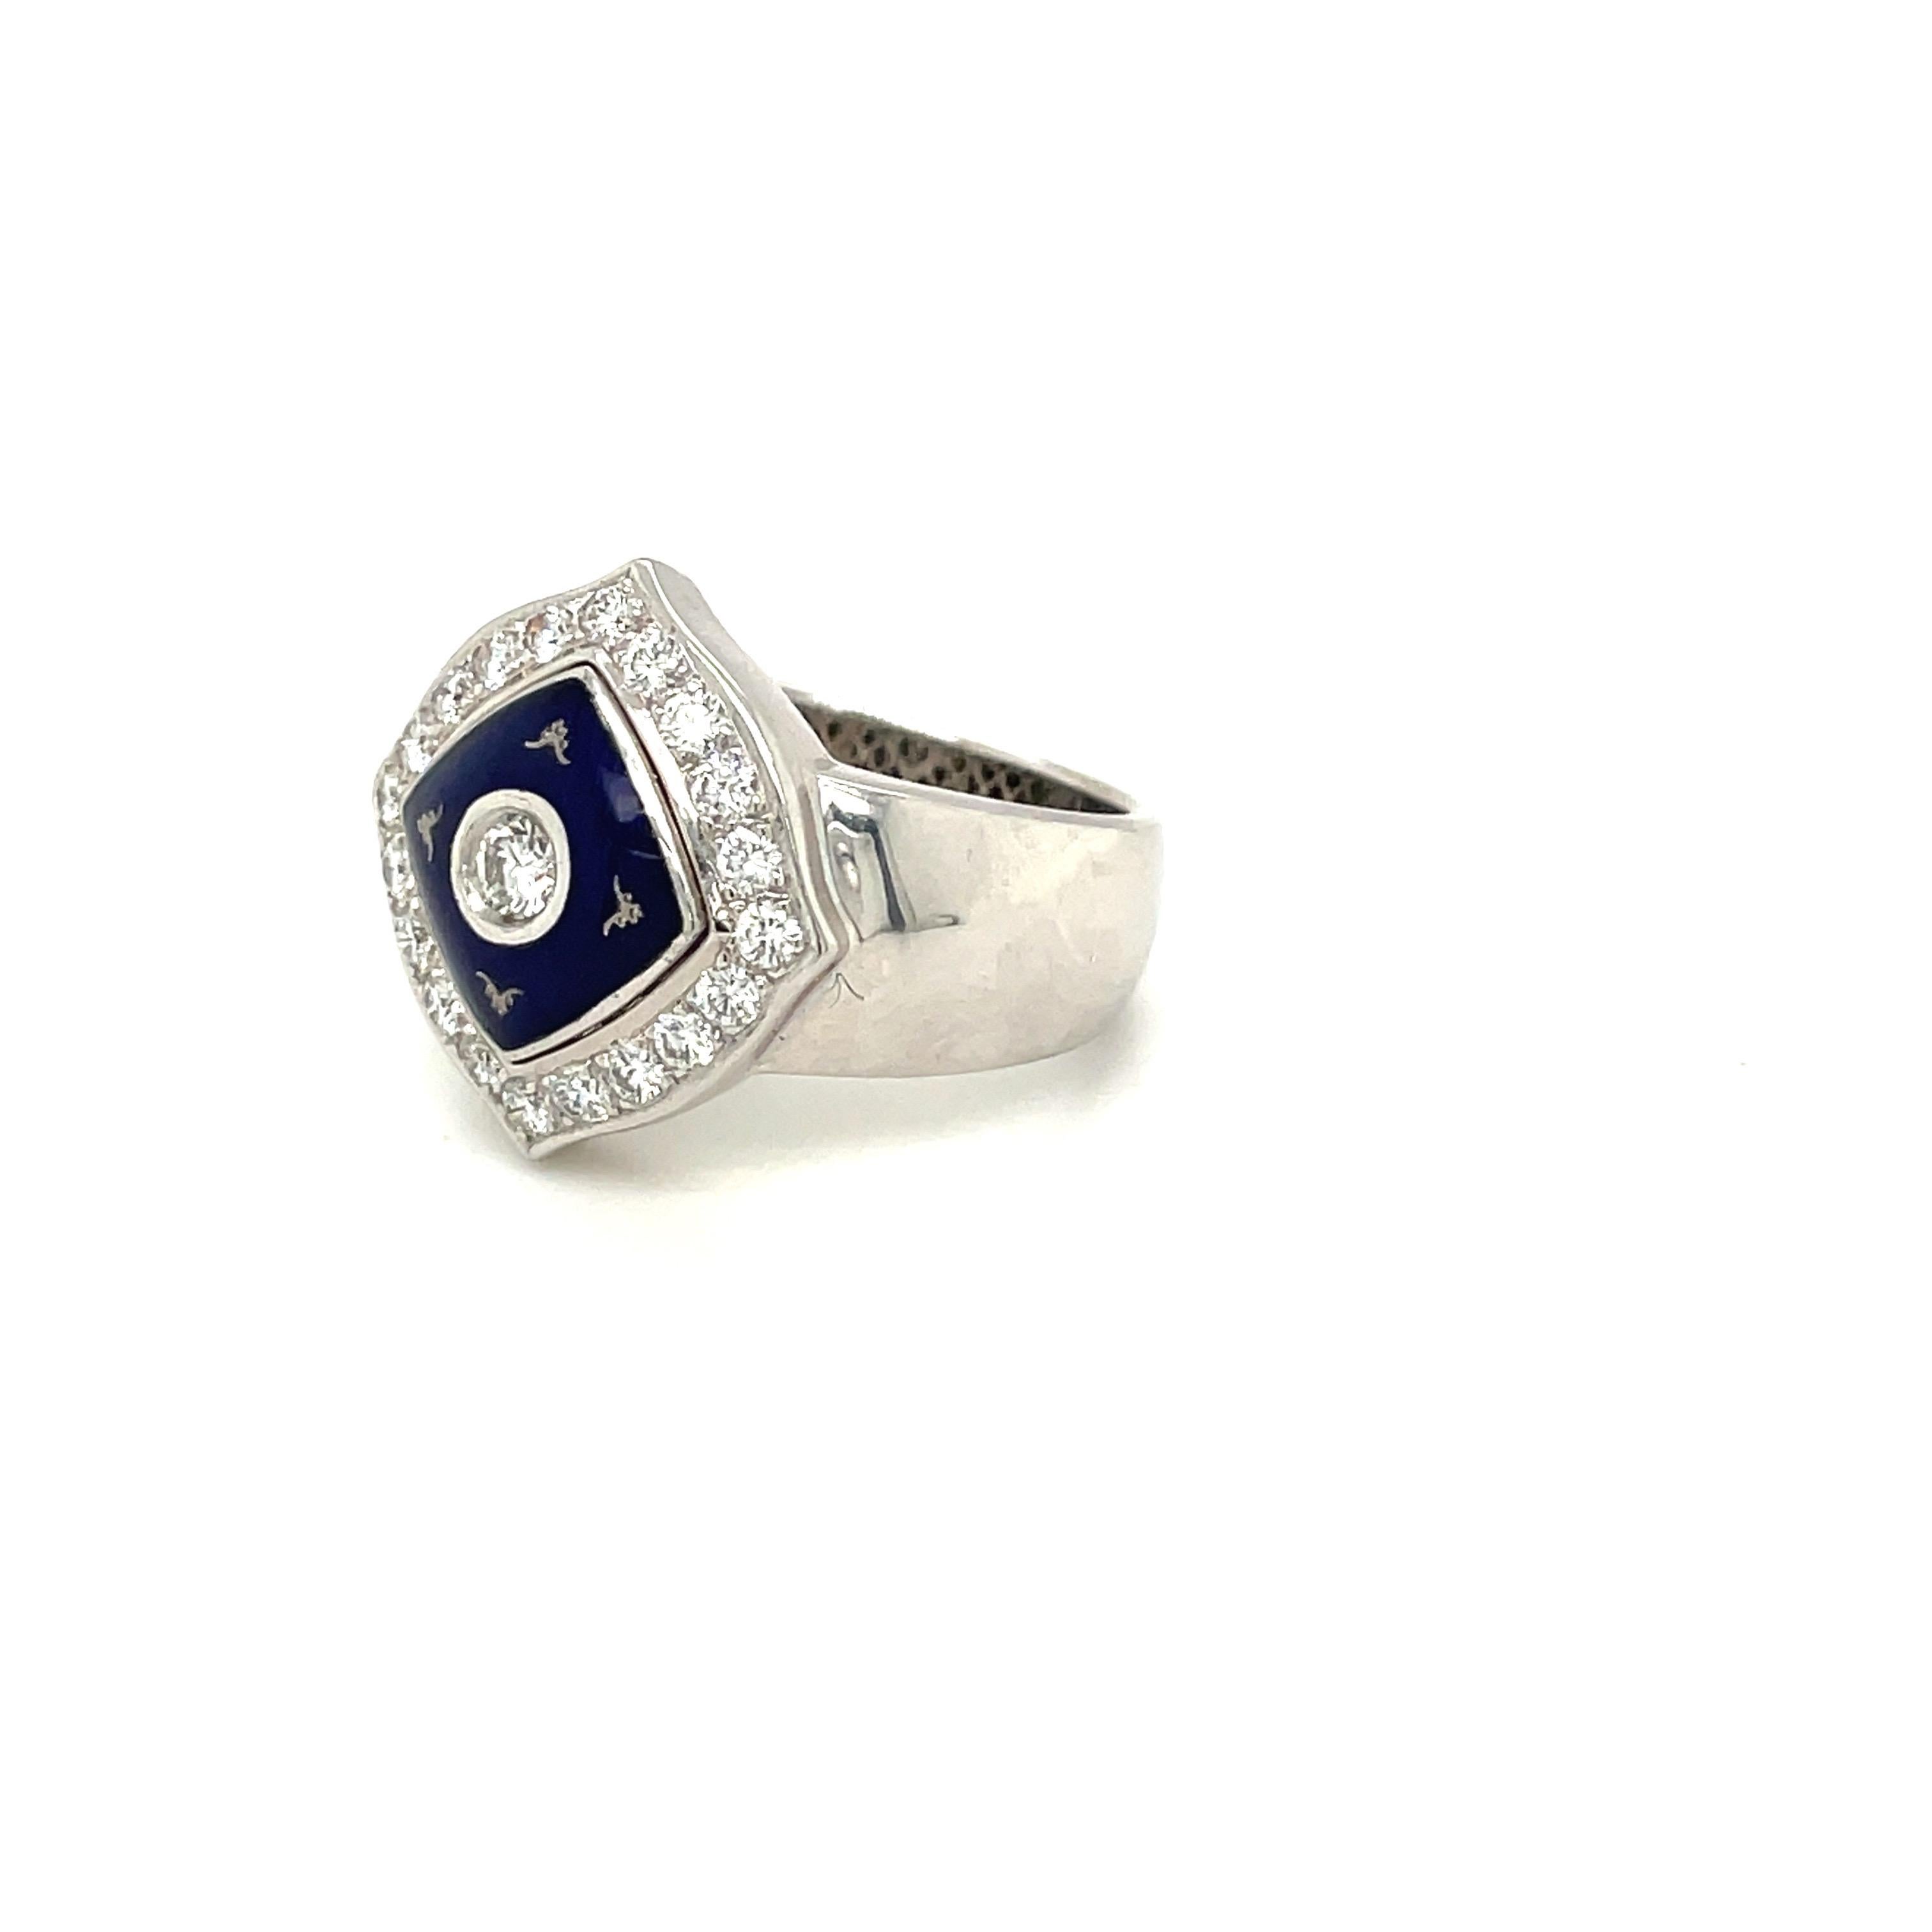 Faberge 18KT White Gold Diamond 0.66 Carat & Blue Enamel Ring, with Certificate In New Condition For Sale In New York, NY